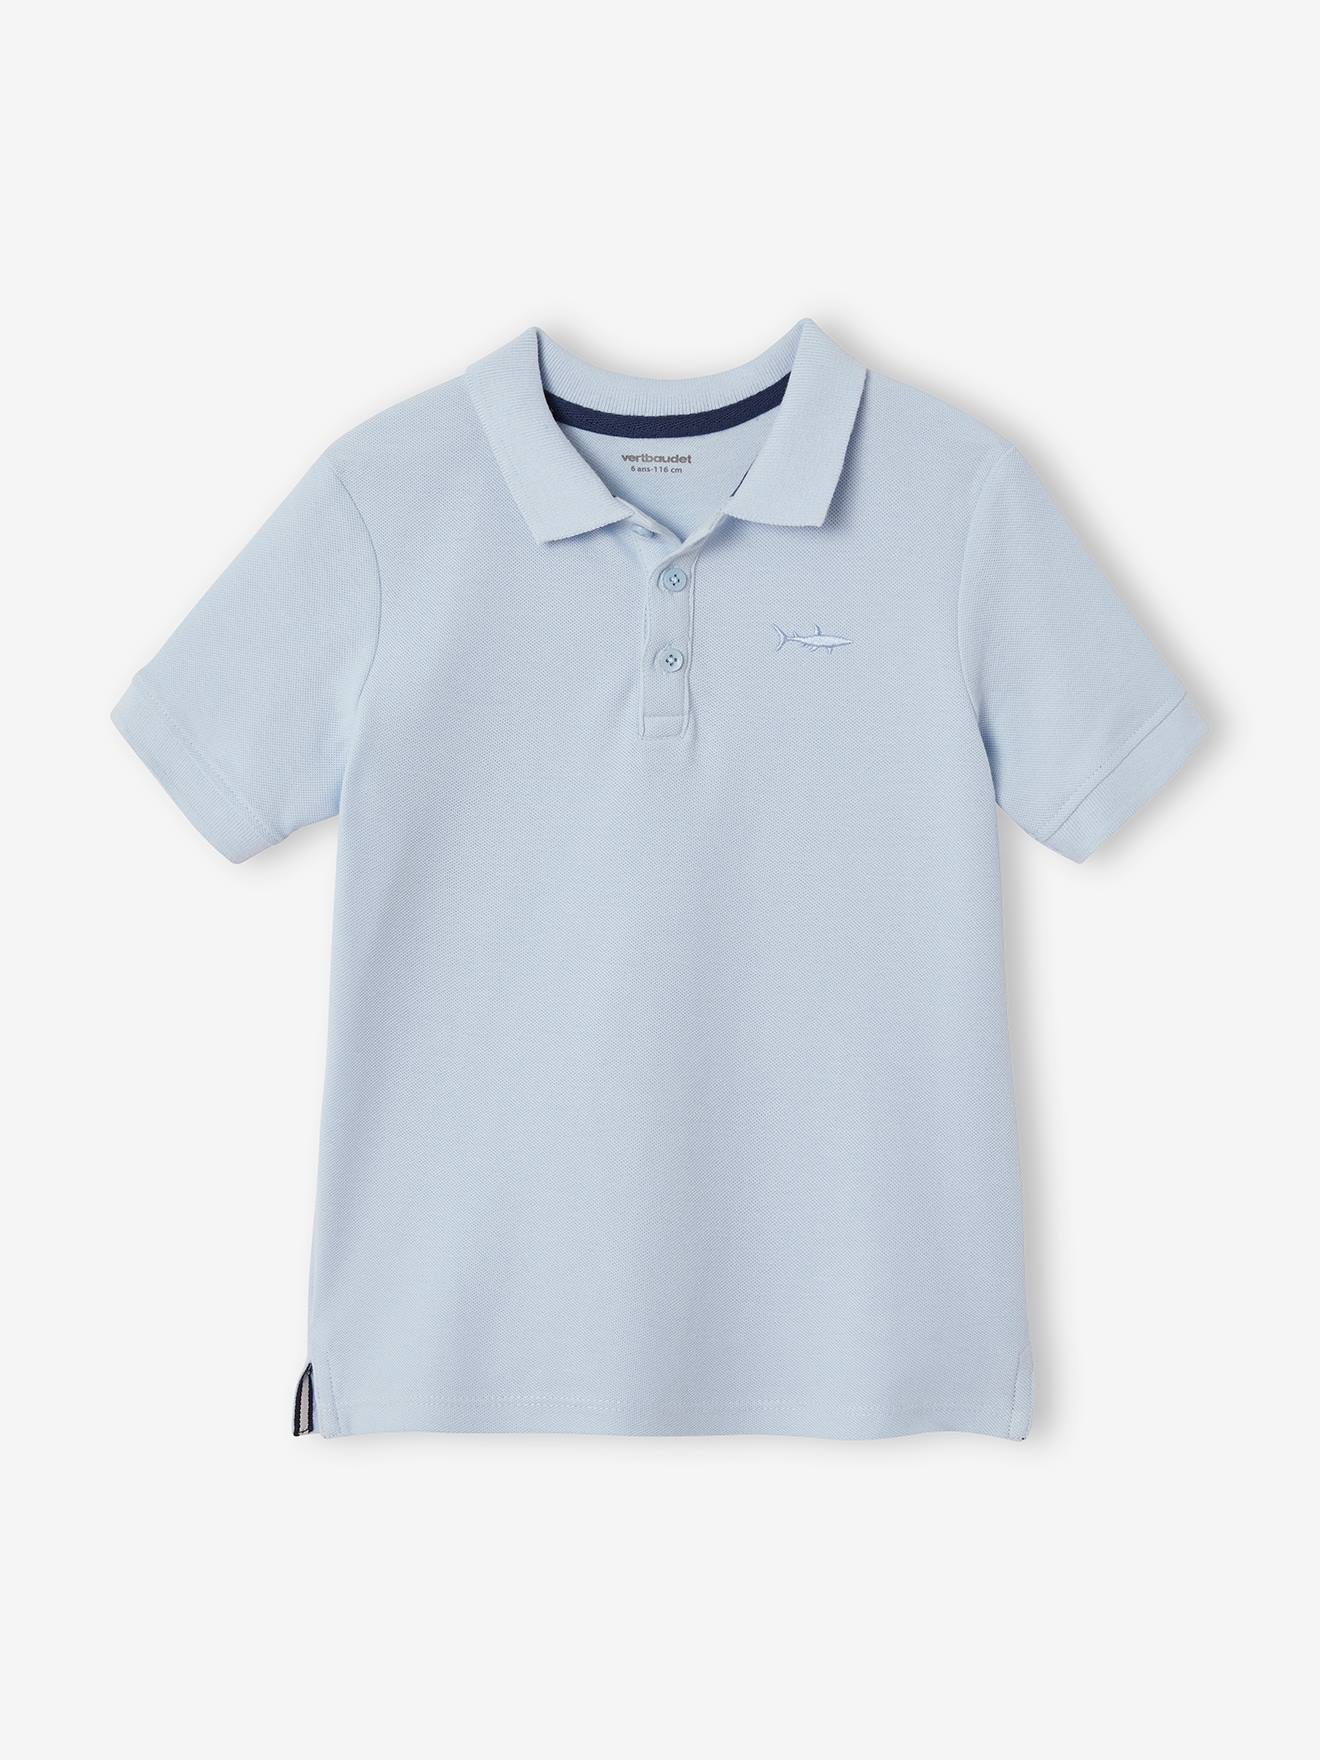 Short Sleeve Polo Shirt, Embroidery on the Chest, for Boys blue light solid with design